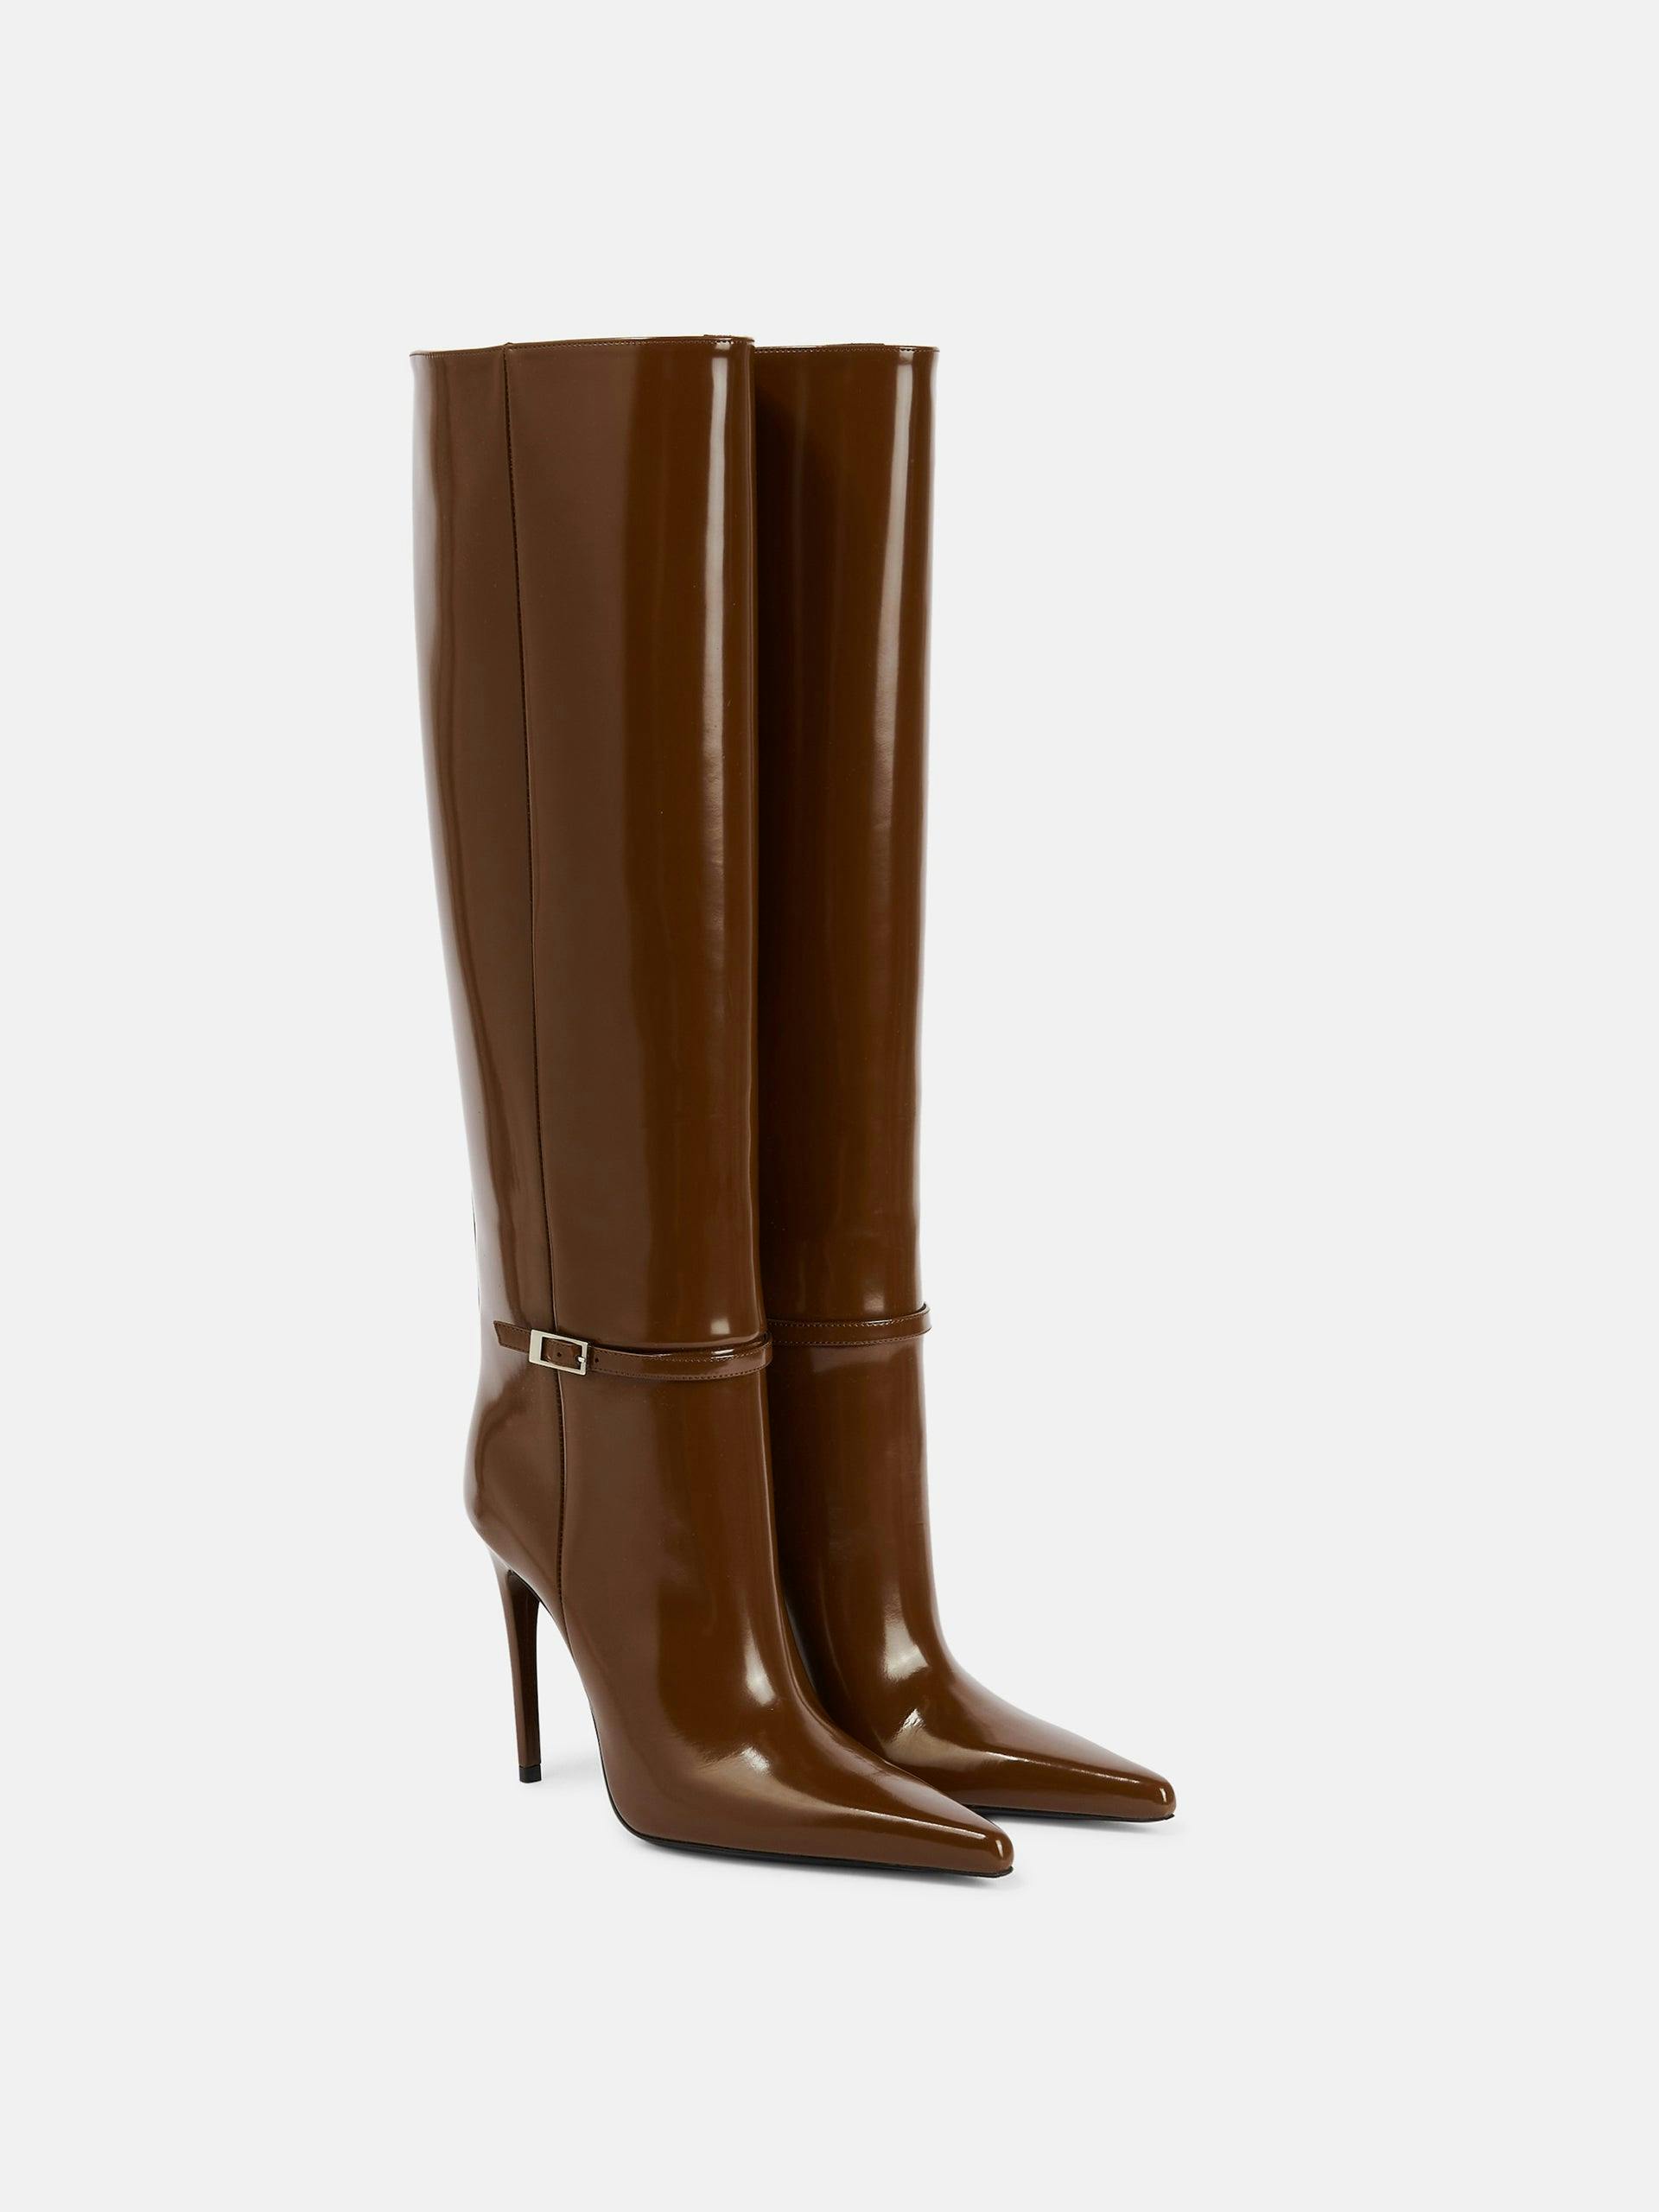 Vendome knee-high leather boots